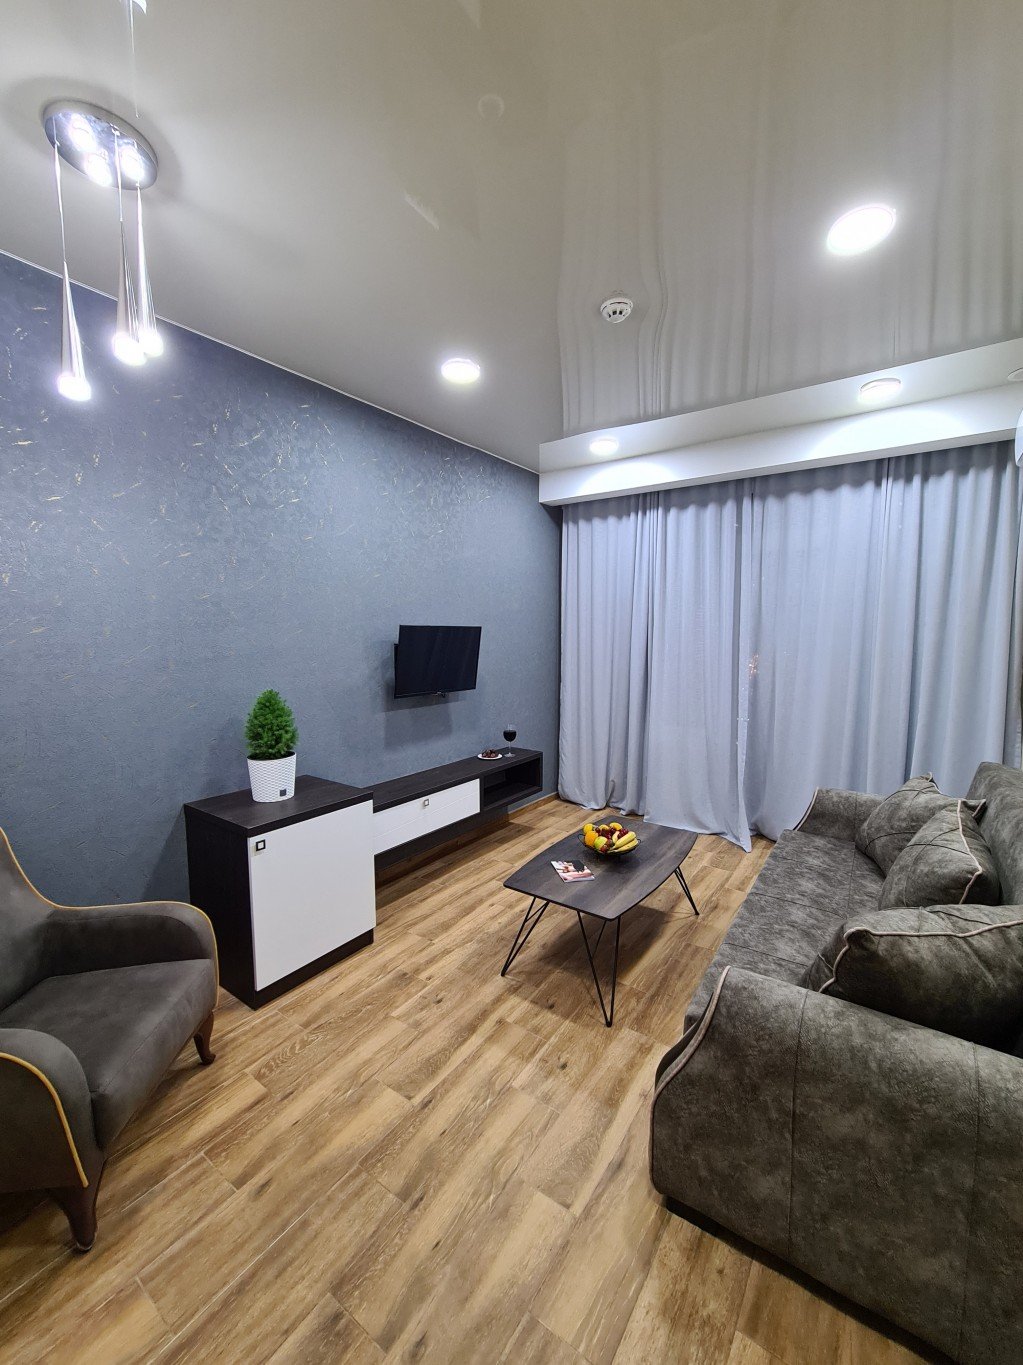 Standard triple room in the hotel "Comfort Time 17" #1703 id-1018 - Batumi Vacation Rentals